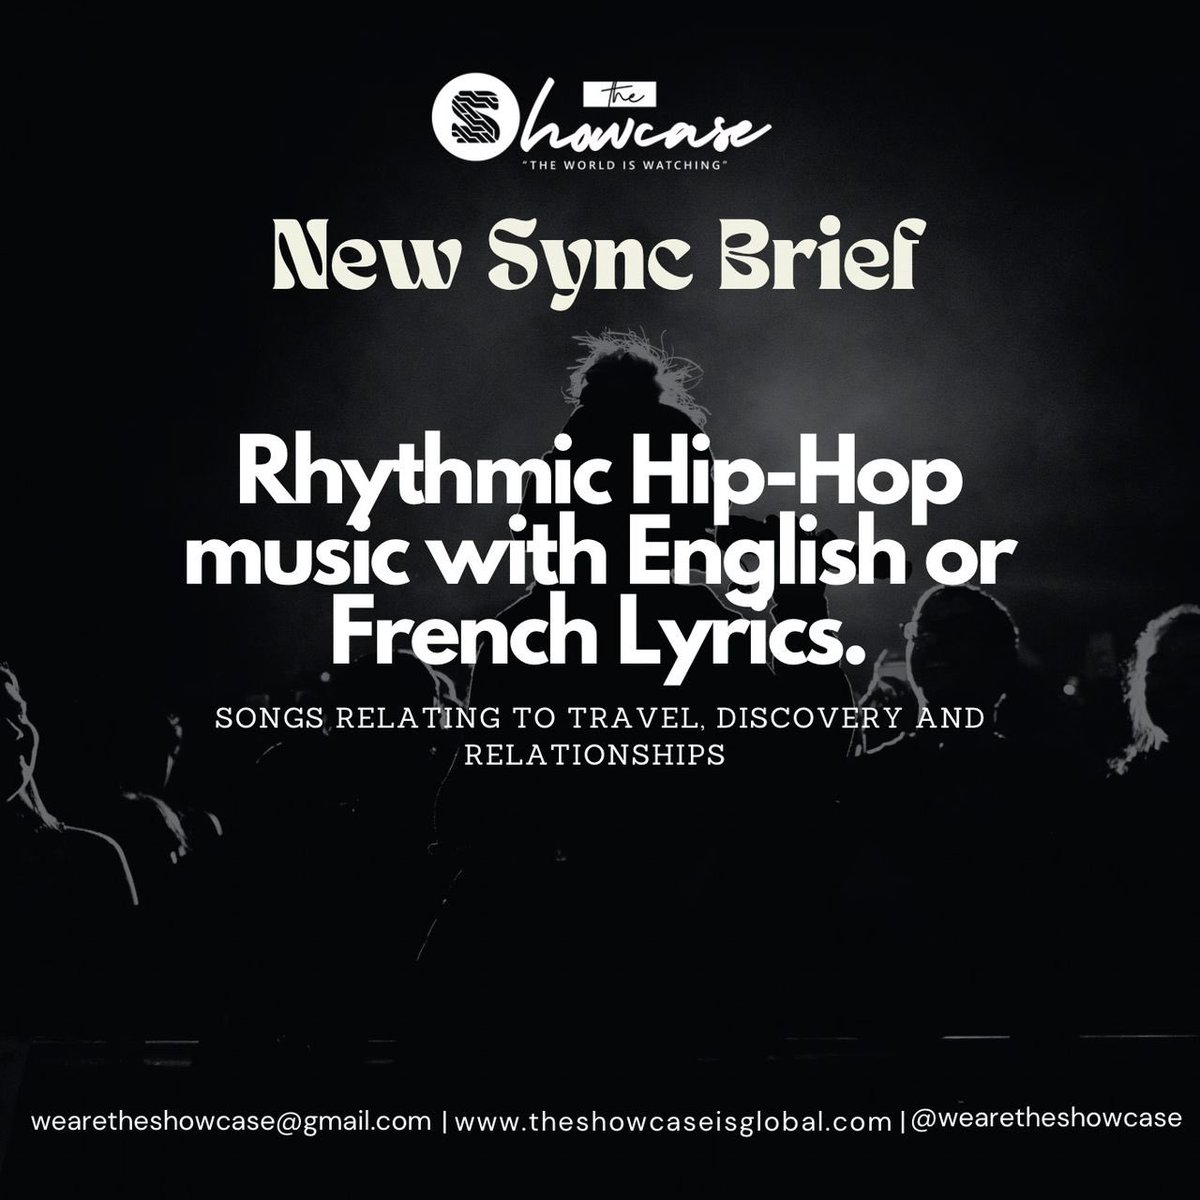 #NewSyncBrief 

Sync Brief: Rhythmic Hip-Hop music with English or French lyrics 

We seek a sync track that relates to travel, discovery and relationships. 
Send us a message for video reference. 

We look forward to your compositions. 
#syncbrief #sync #syncplacement